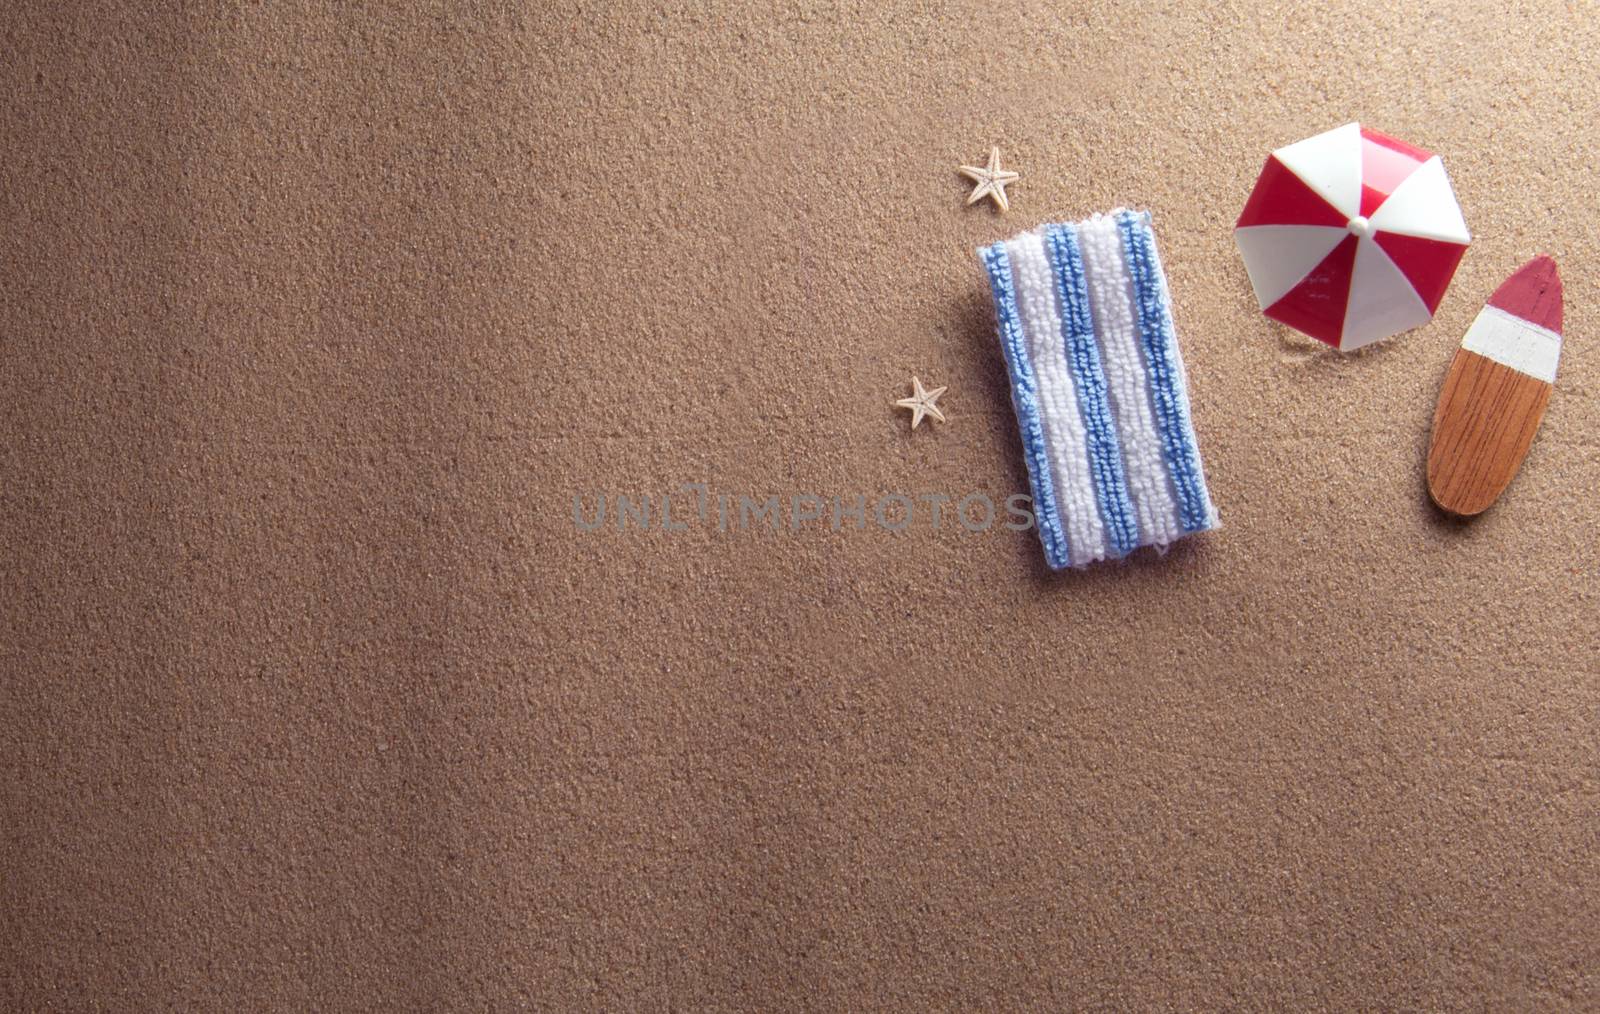 Miniature parasol and towel on beach sand